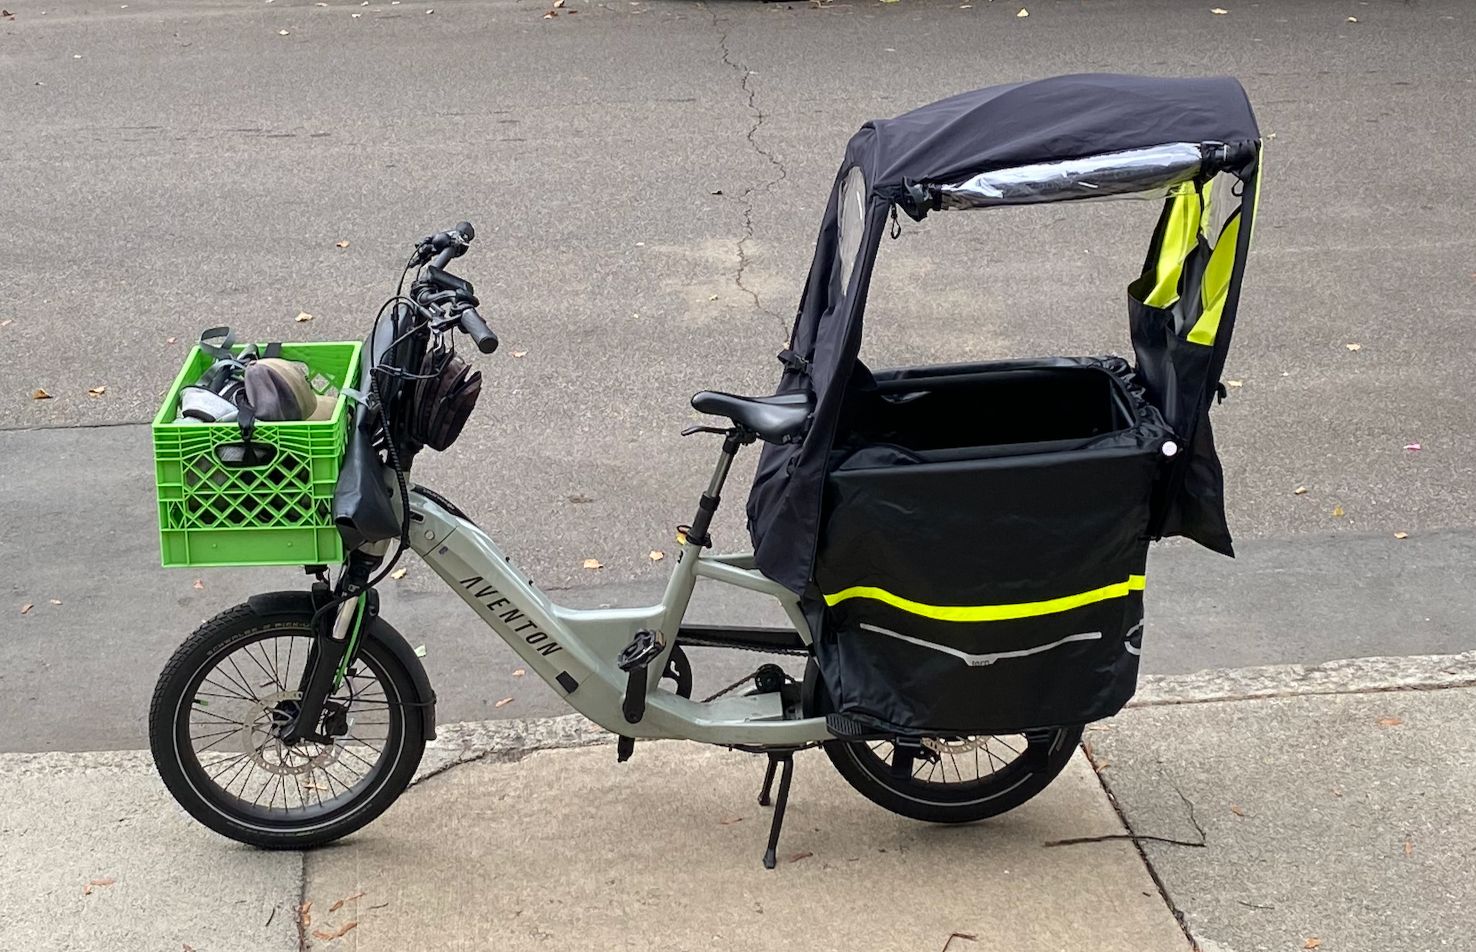 a modern cargo bicycle parked on an asphalt surface. It's equipped with a large black cargo box on the rear, featuring reflective yellow stripes for visibility. The box has a black rain cover with a rolled-up transparent section. Attached to the handlebar is a bright green plastic crate holding various items. The bike is designed for utility and appears ready for all-weather conditions.